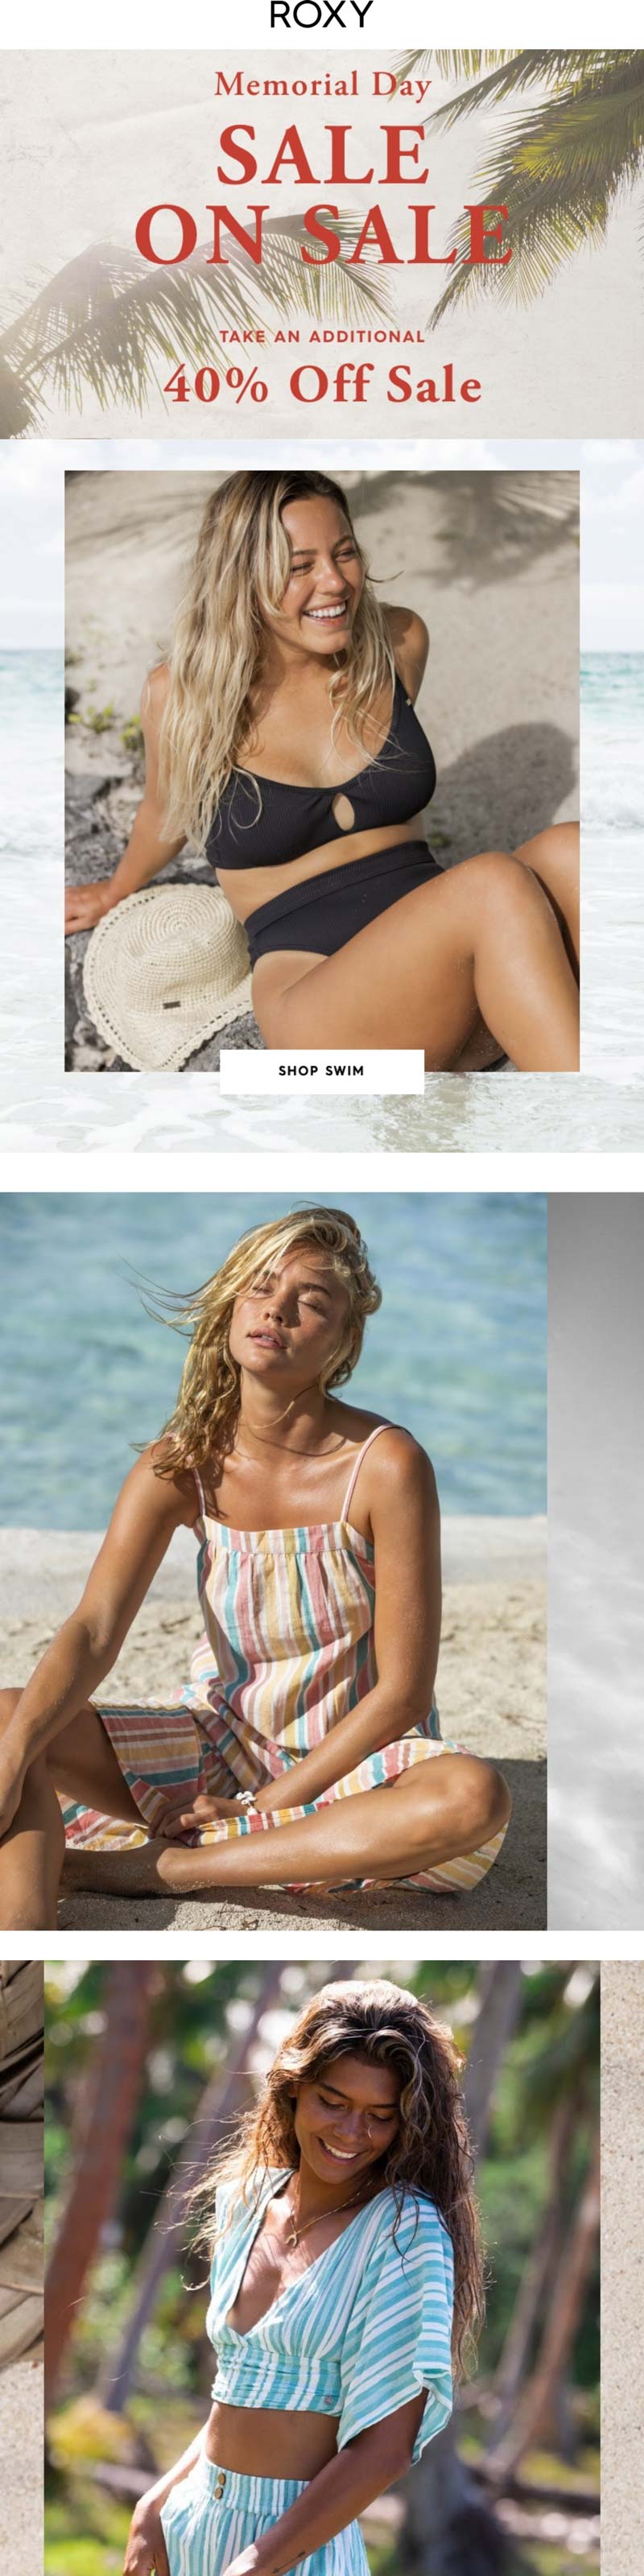 ROXY stores Coupon  Extra 40% off sale styles at ROXY #roxy 